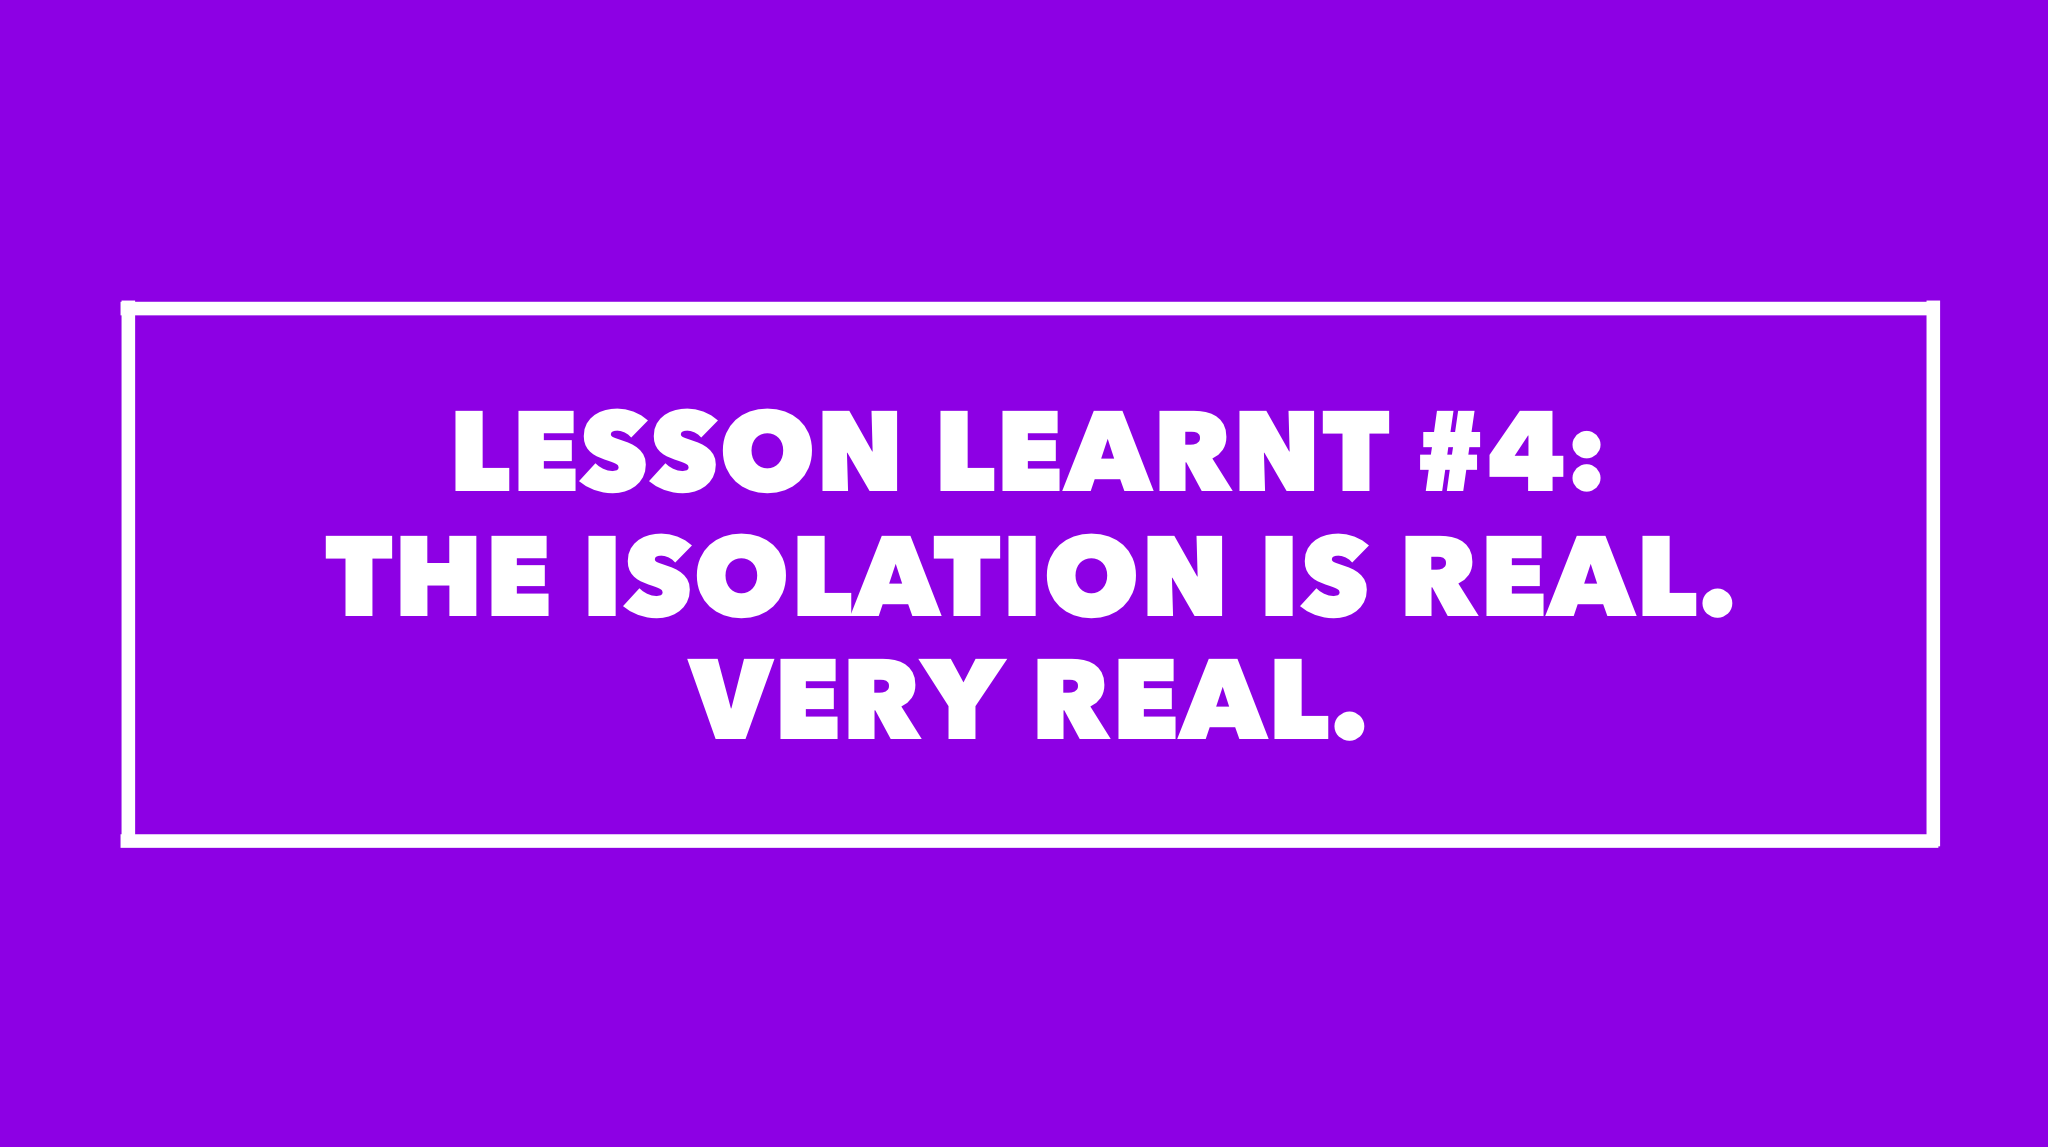 Lessons Learnt #4: The isolation is real. Very real. 